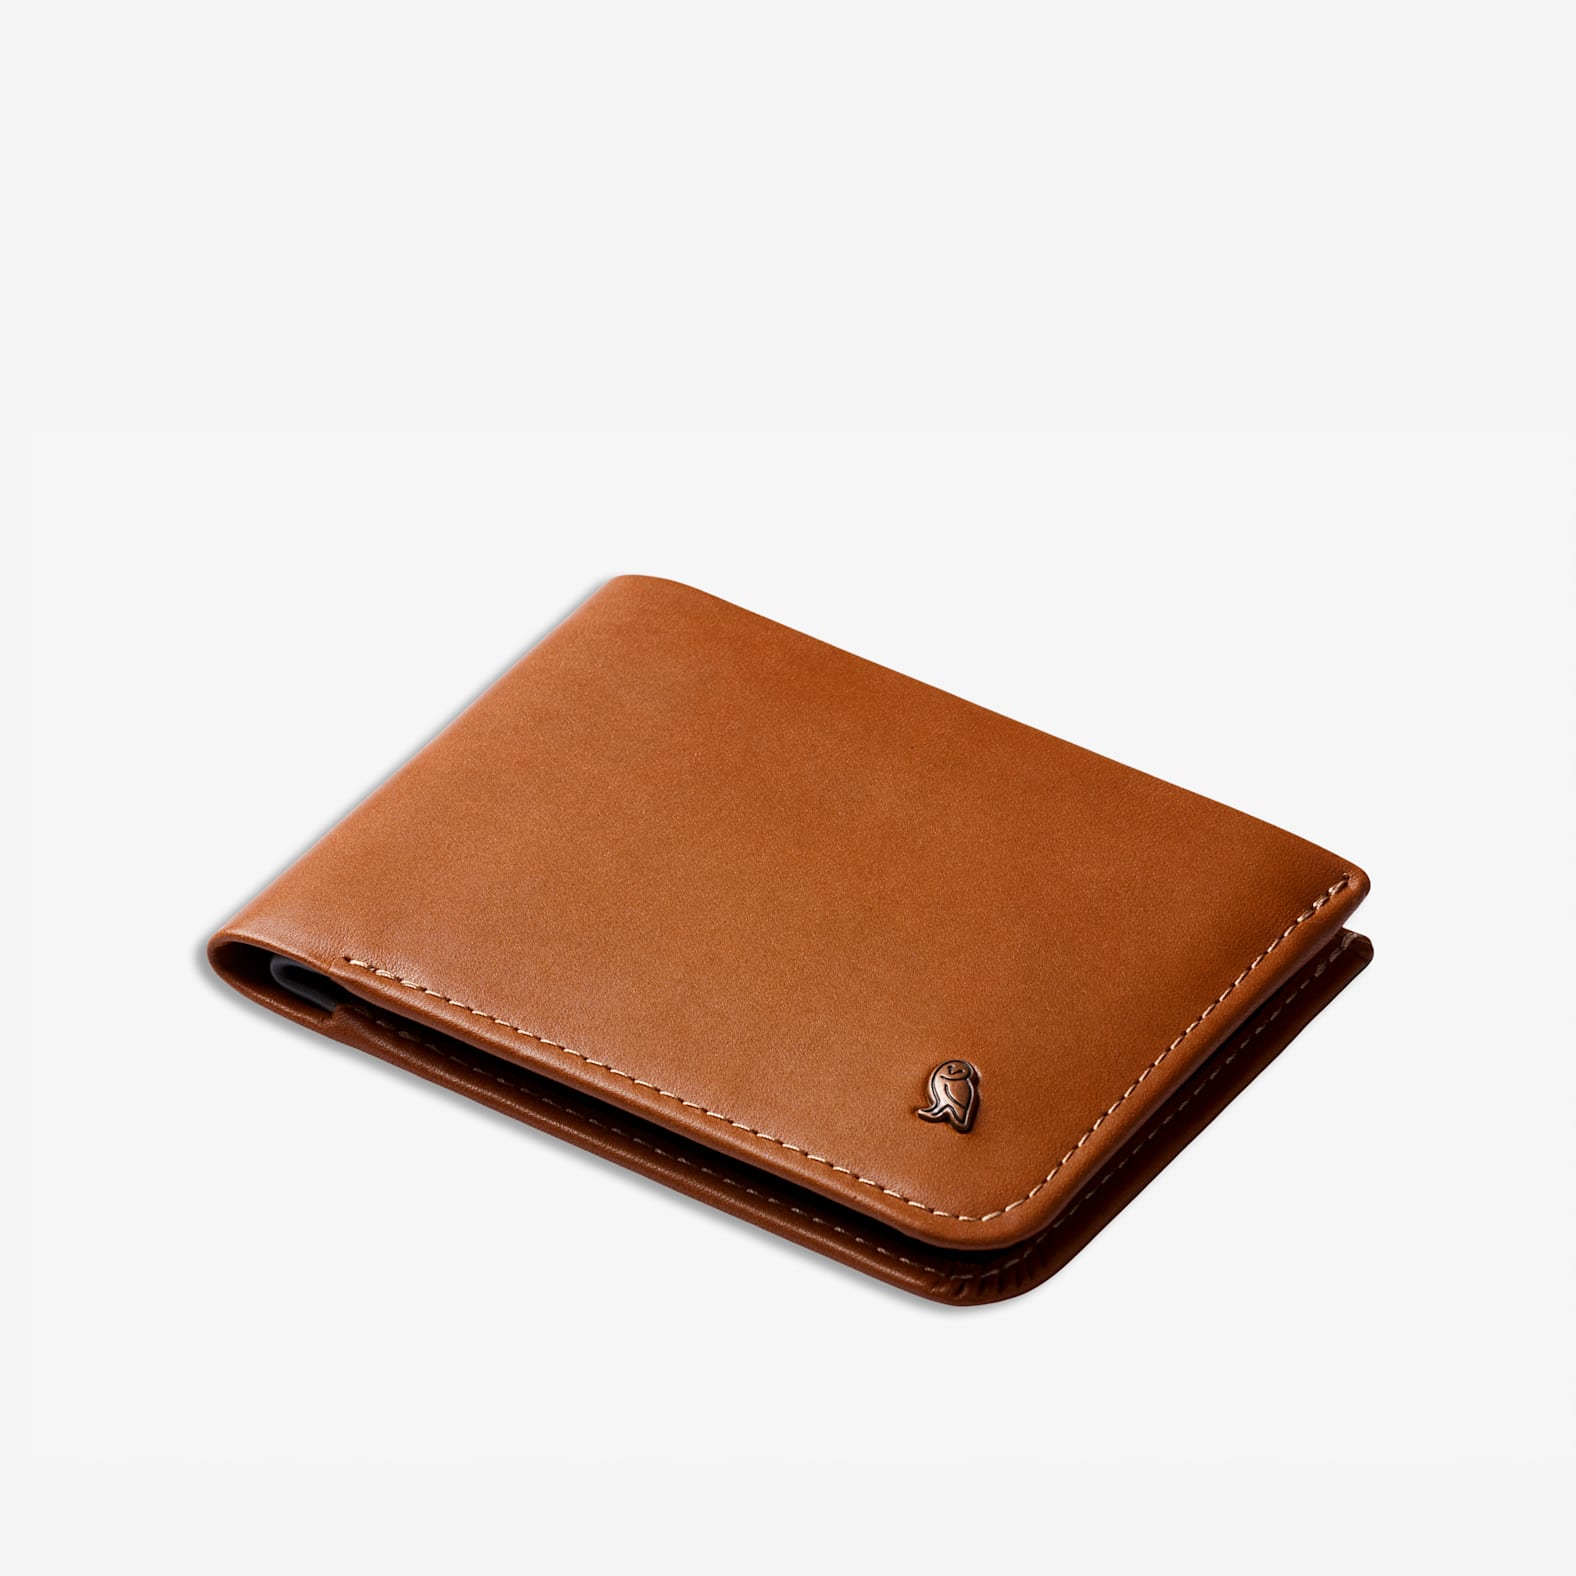 Bellroy's Hide & Seek features are fun, but are they useful? 